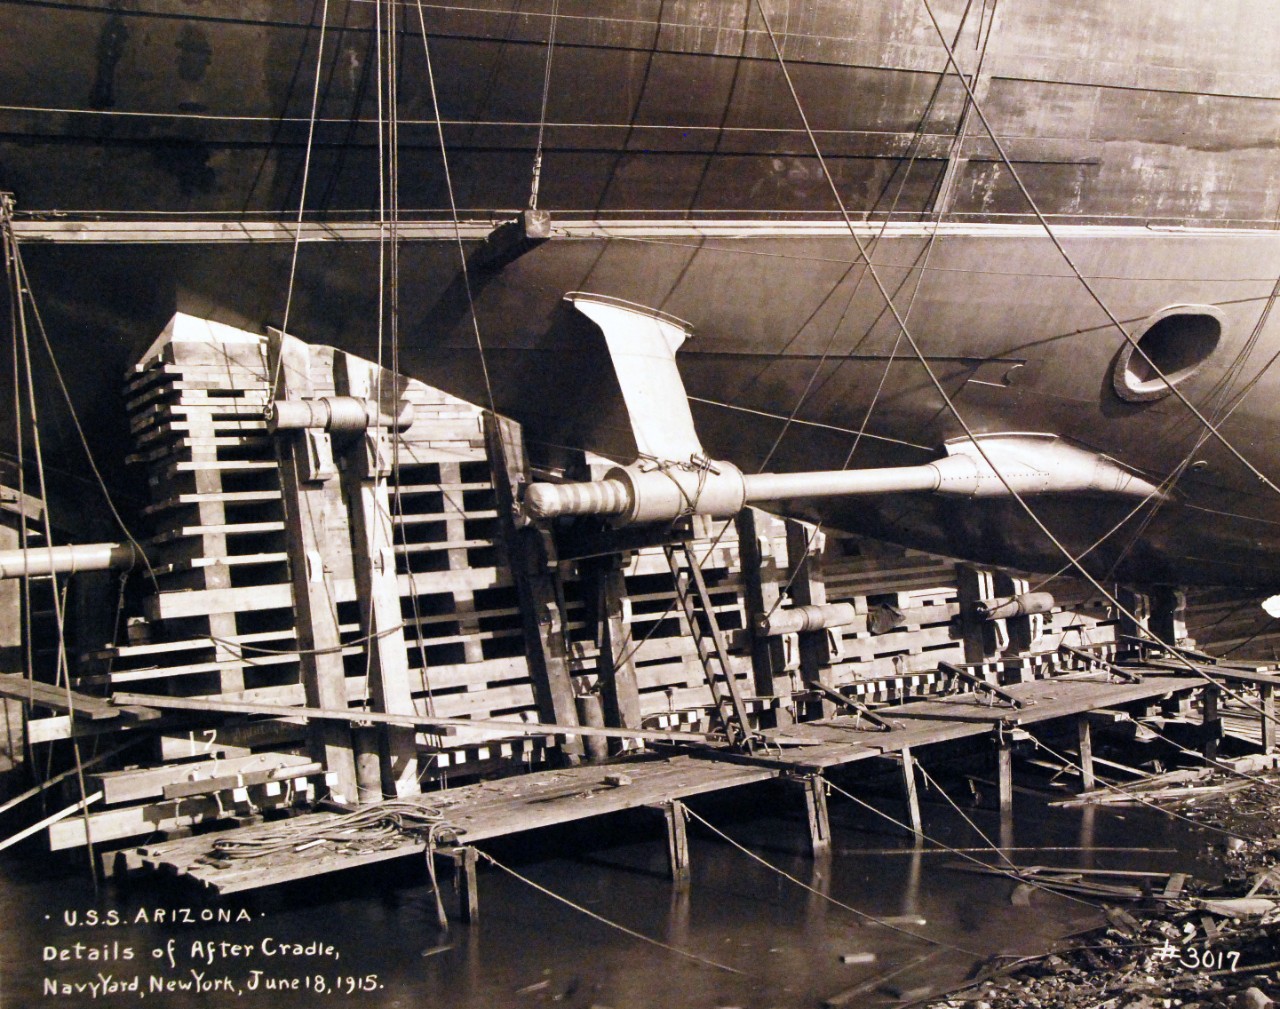 <p>19-LC-19A-12: USS Arizona (BB 39) details of after cradle before launched at New York Navy Yard, New York, June 19, 1915. Photographed June 18, 1915.&nbsp;</p>
